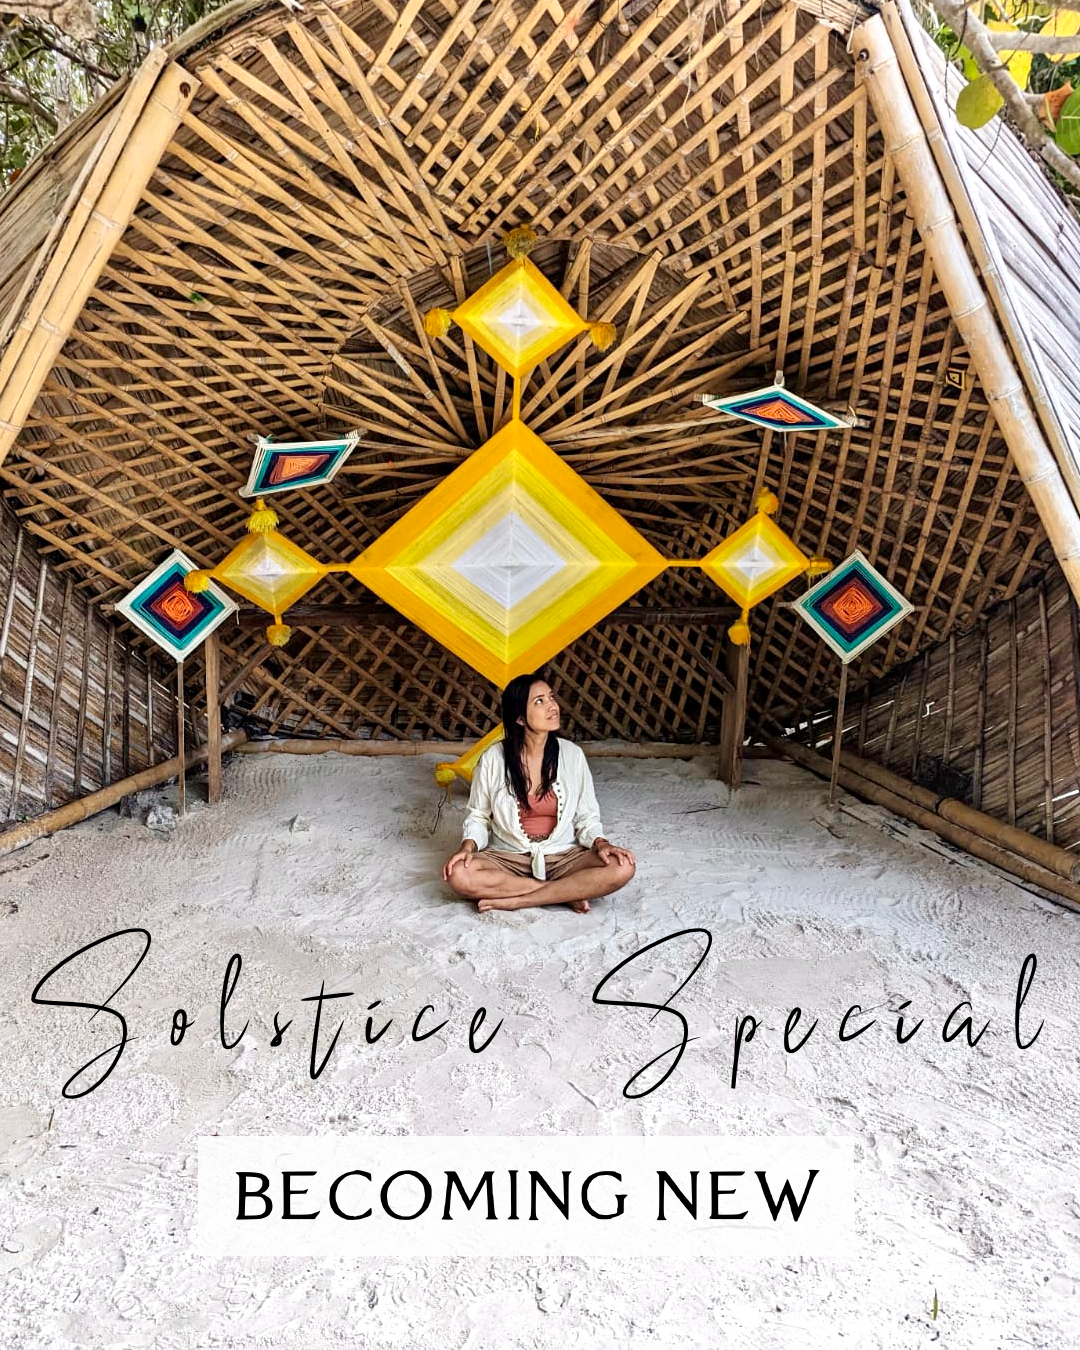 Solstice Special: Becoming New ~ Ceremony Recording